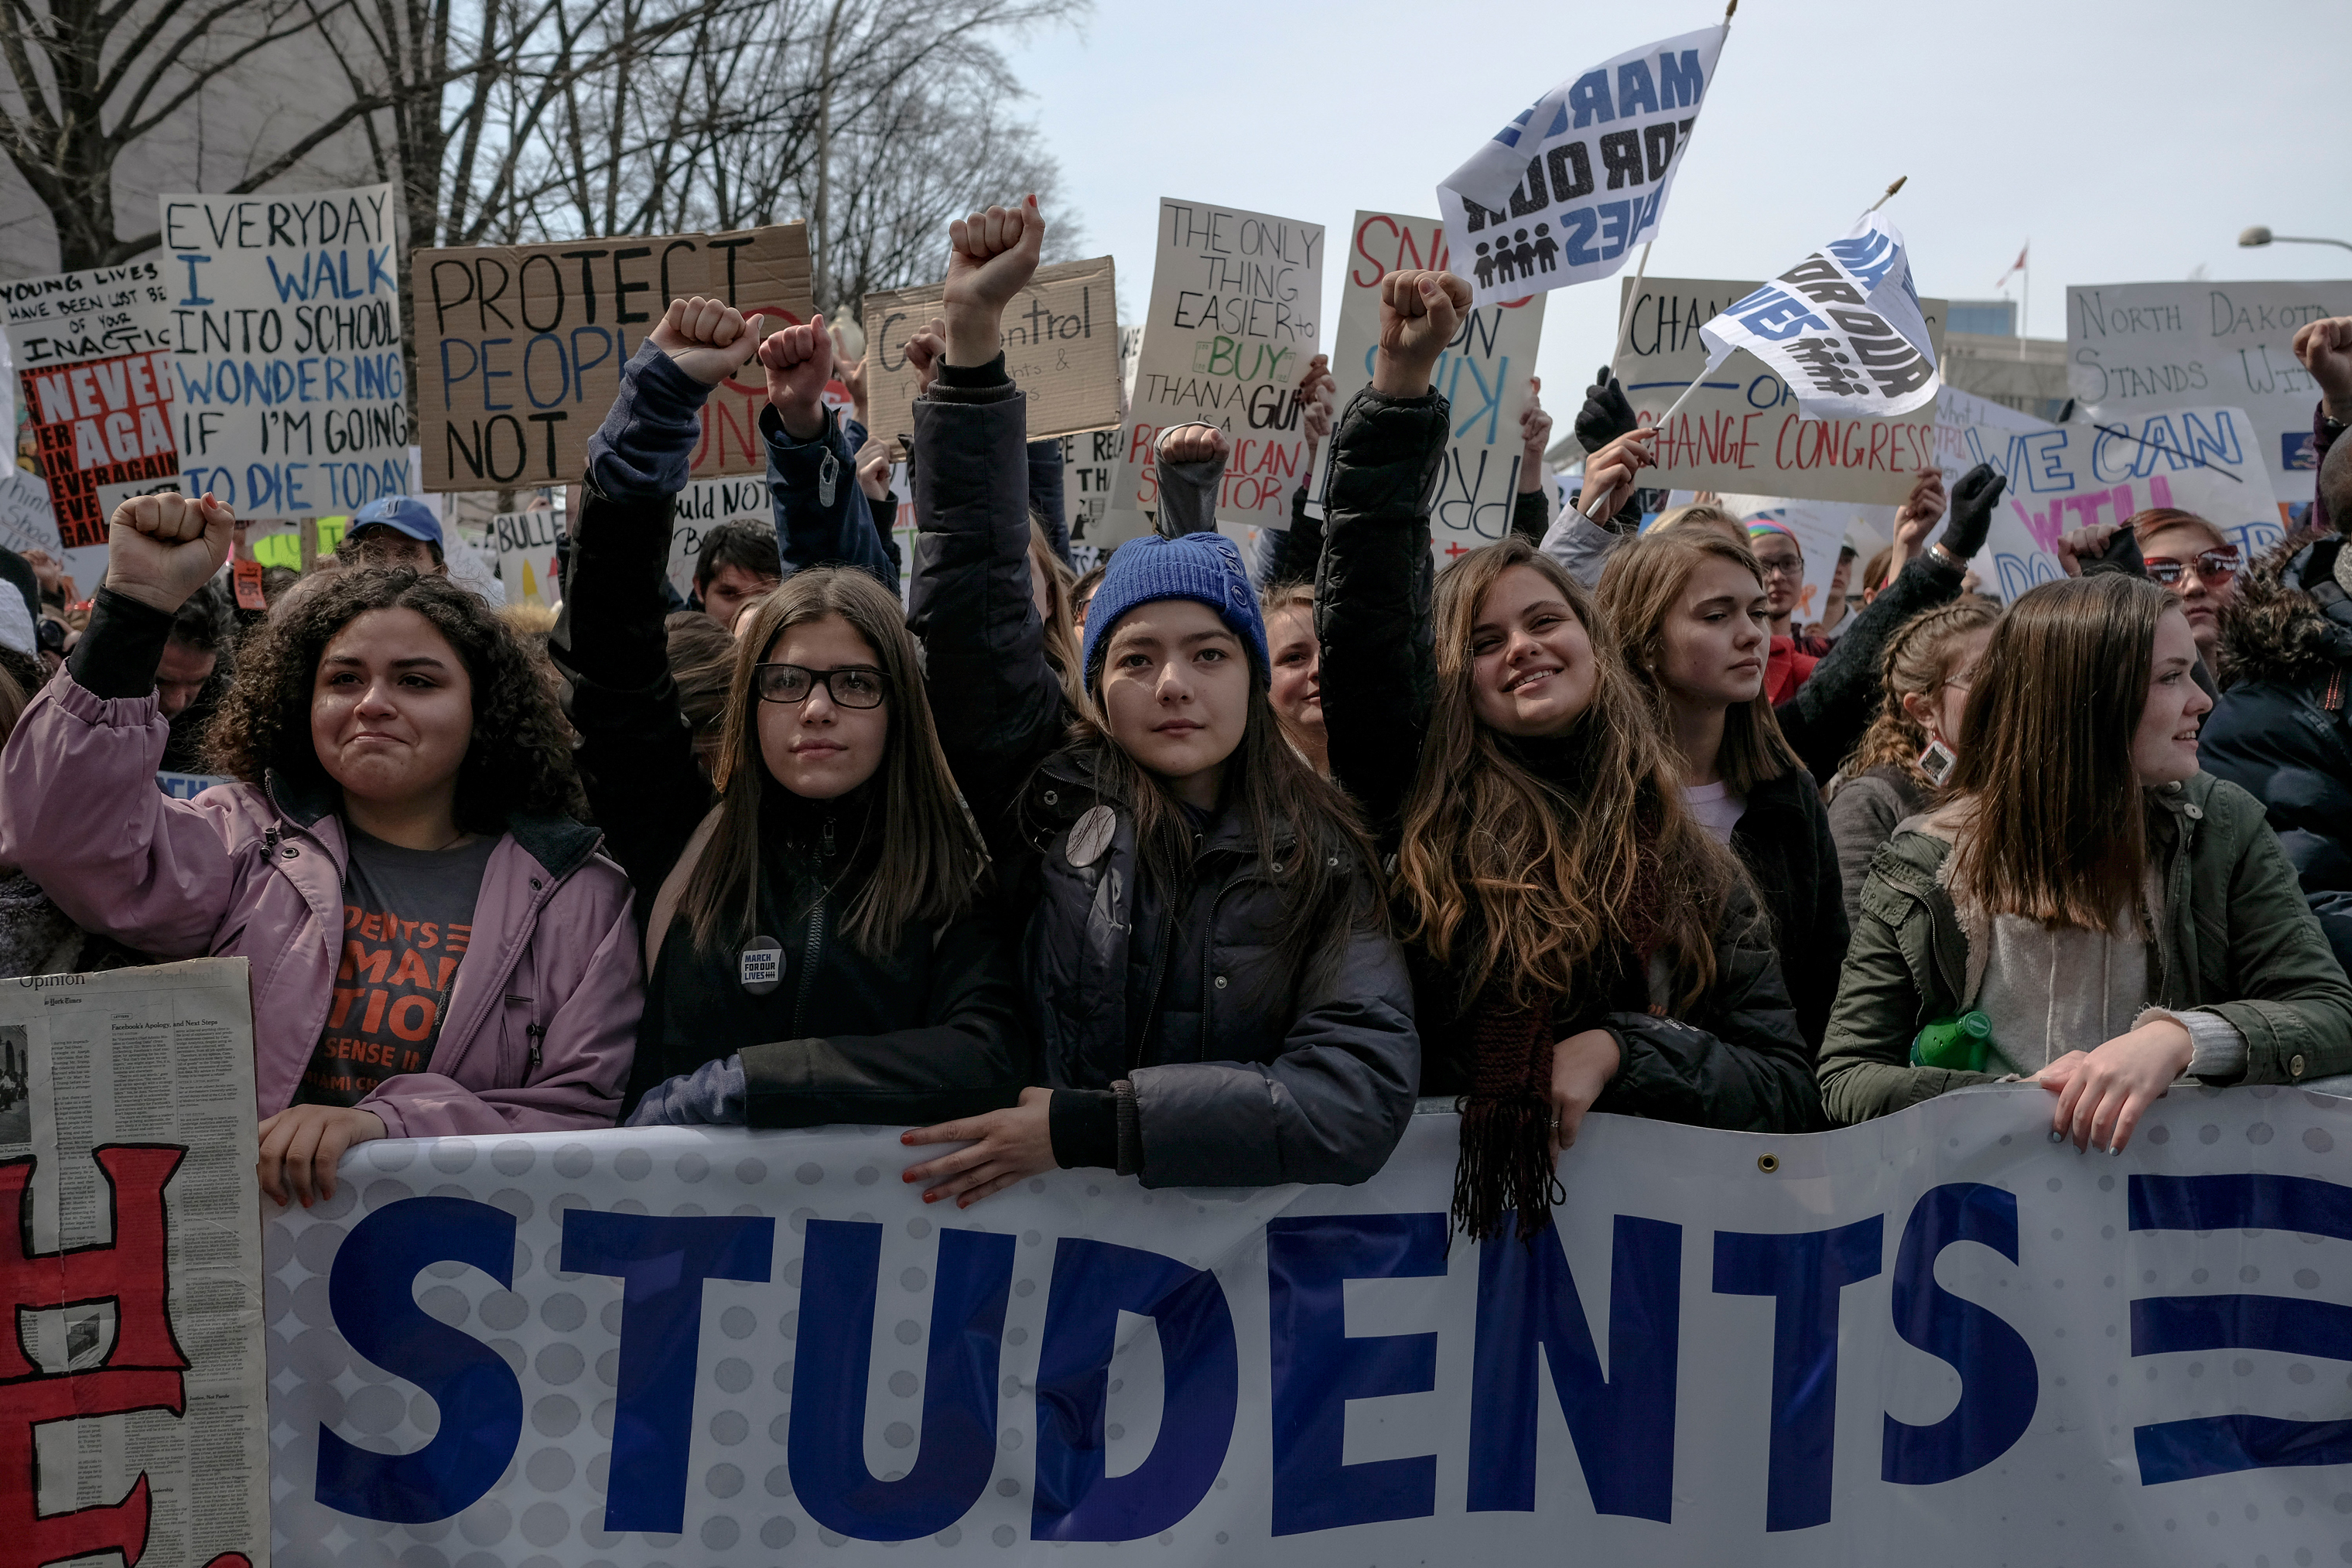 Stduents put their fits in the air in response to the Parkland students and #NeverAgain organizers. (Gabriella Demczuk for TIME)